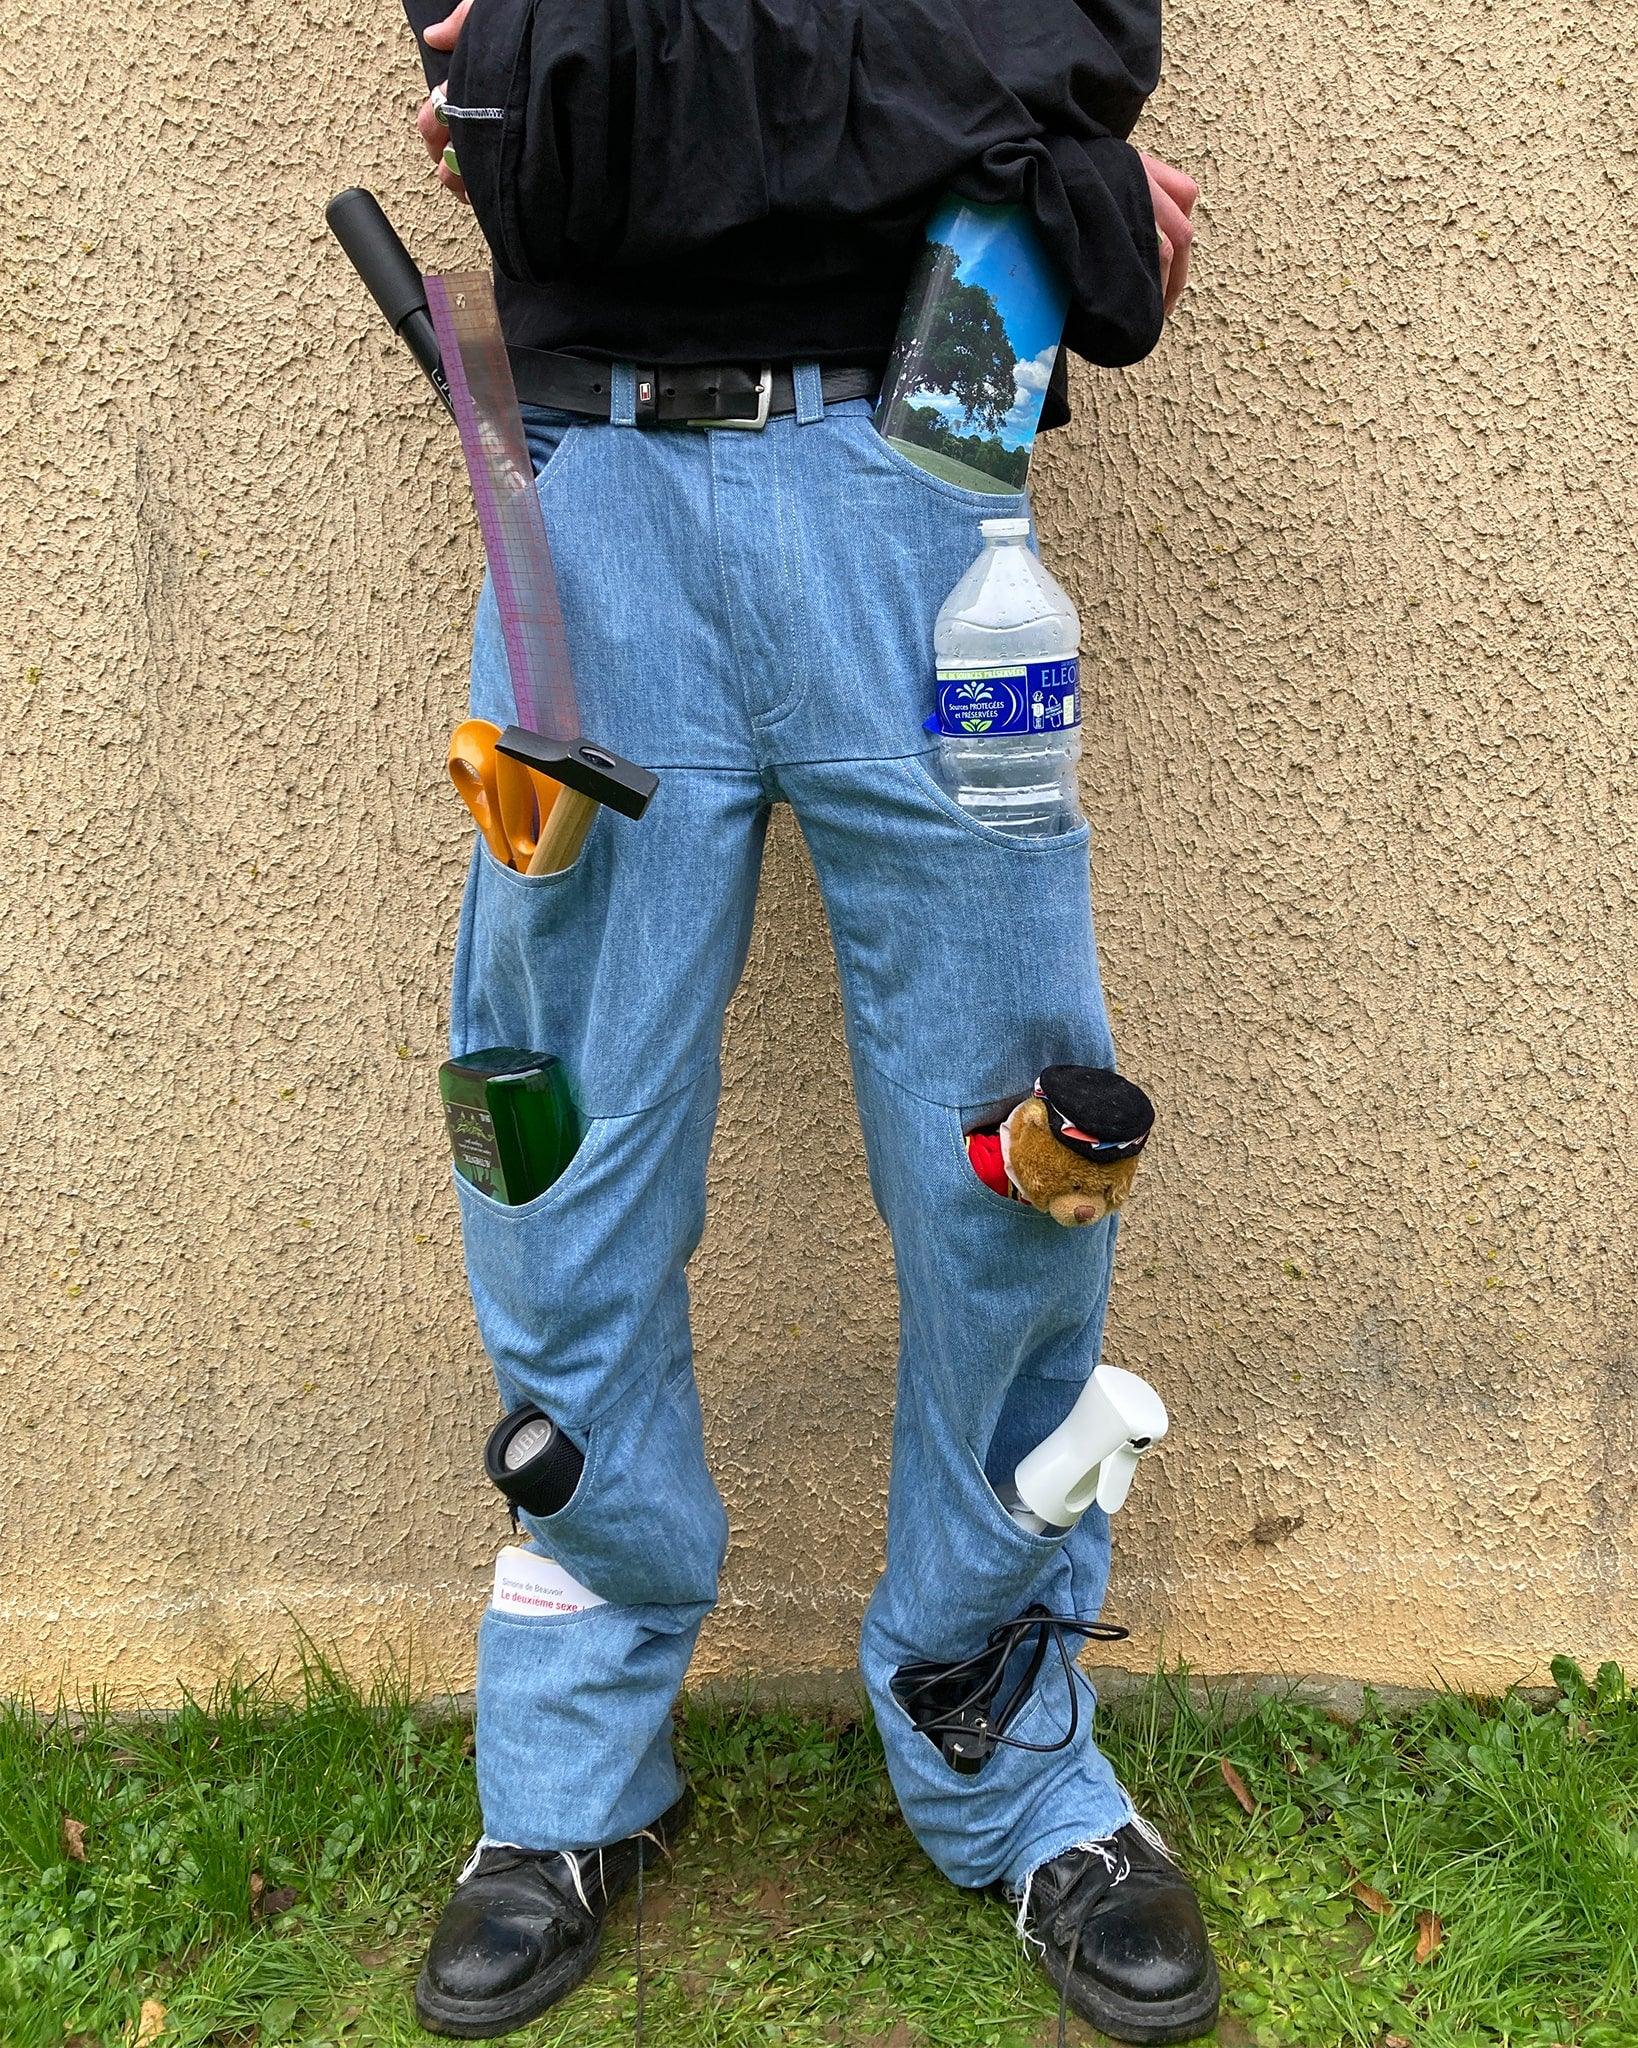 Unlimited Space Jeans worn by a model - The 10 front pockets are filled with random objects.